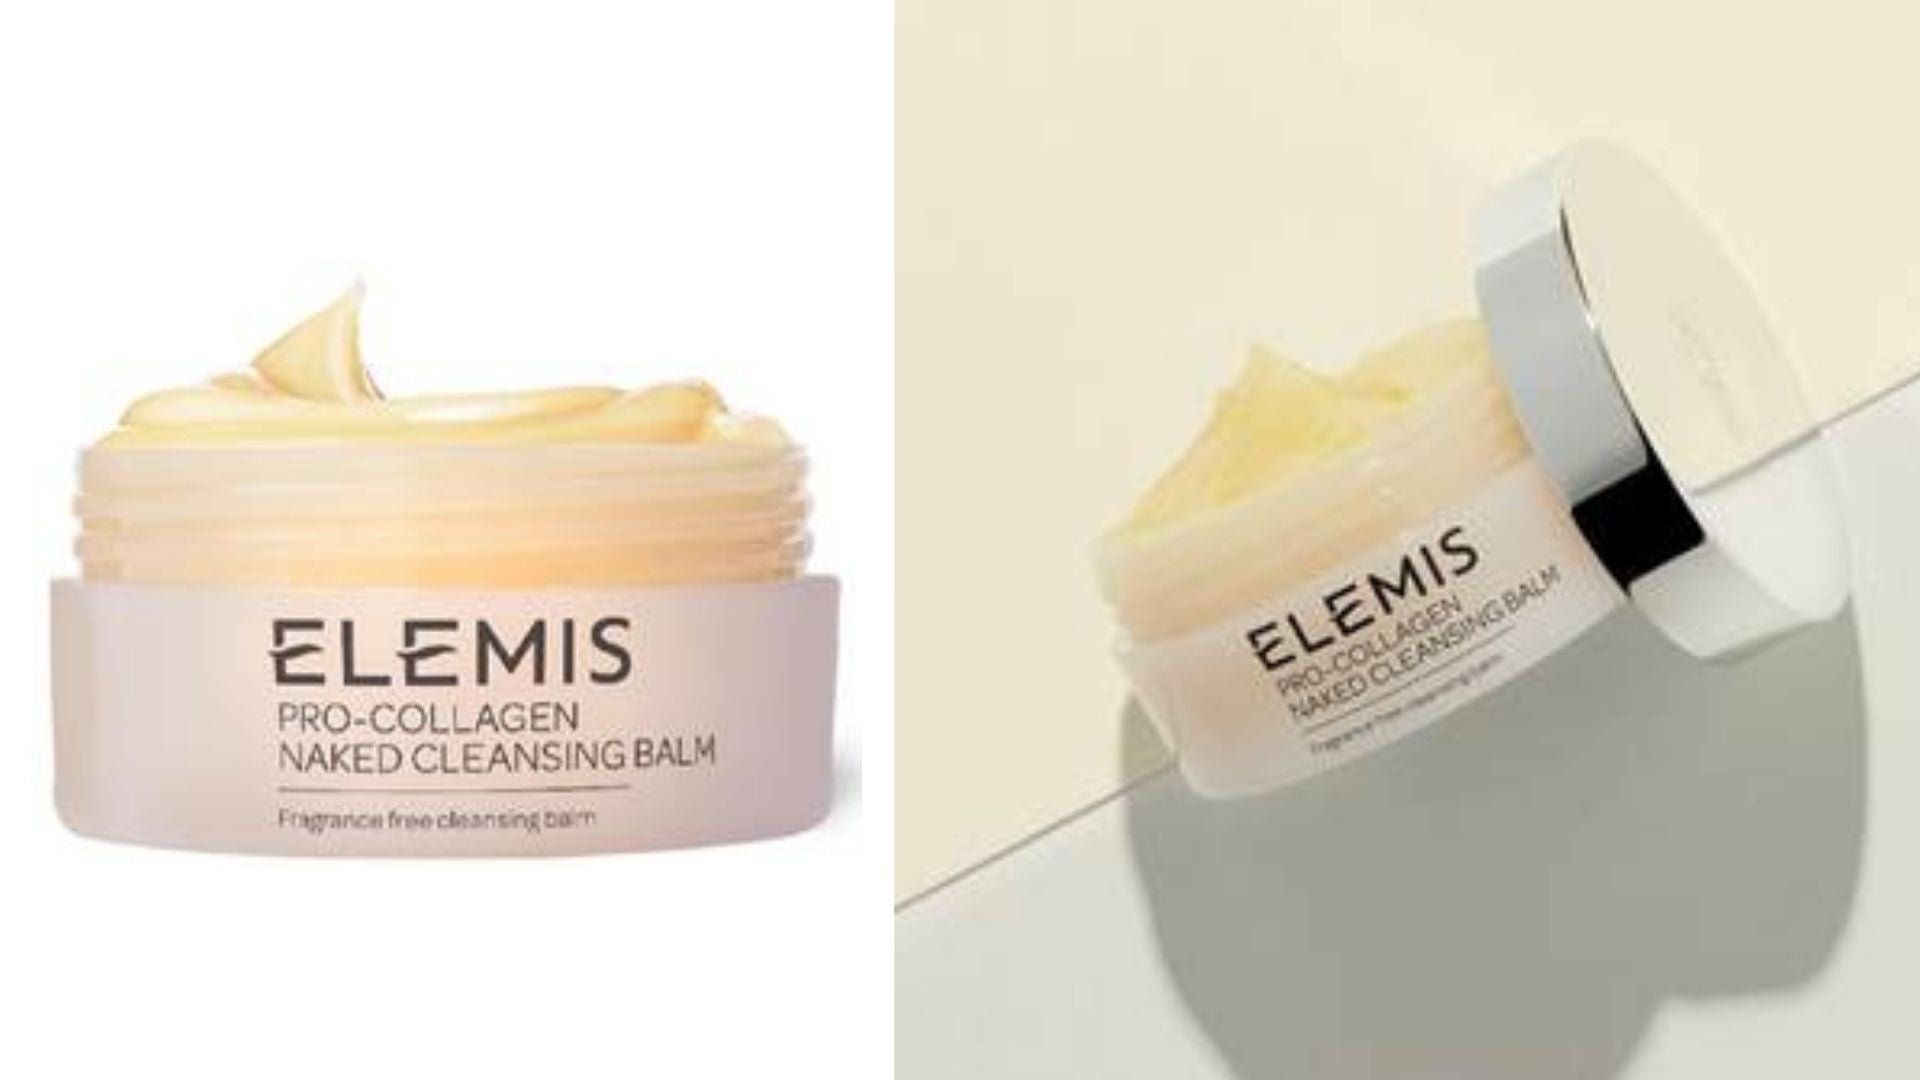 review, ingredients, photos, skincare, trends, 2021, 2022, elemis, pro-collagen naked cleansing balm, fragrance free, makeup remover, waterproof makeup remover, high end skincare, best makeup removers